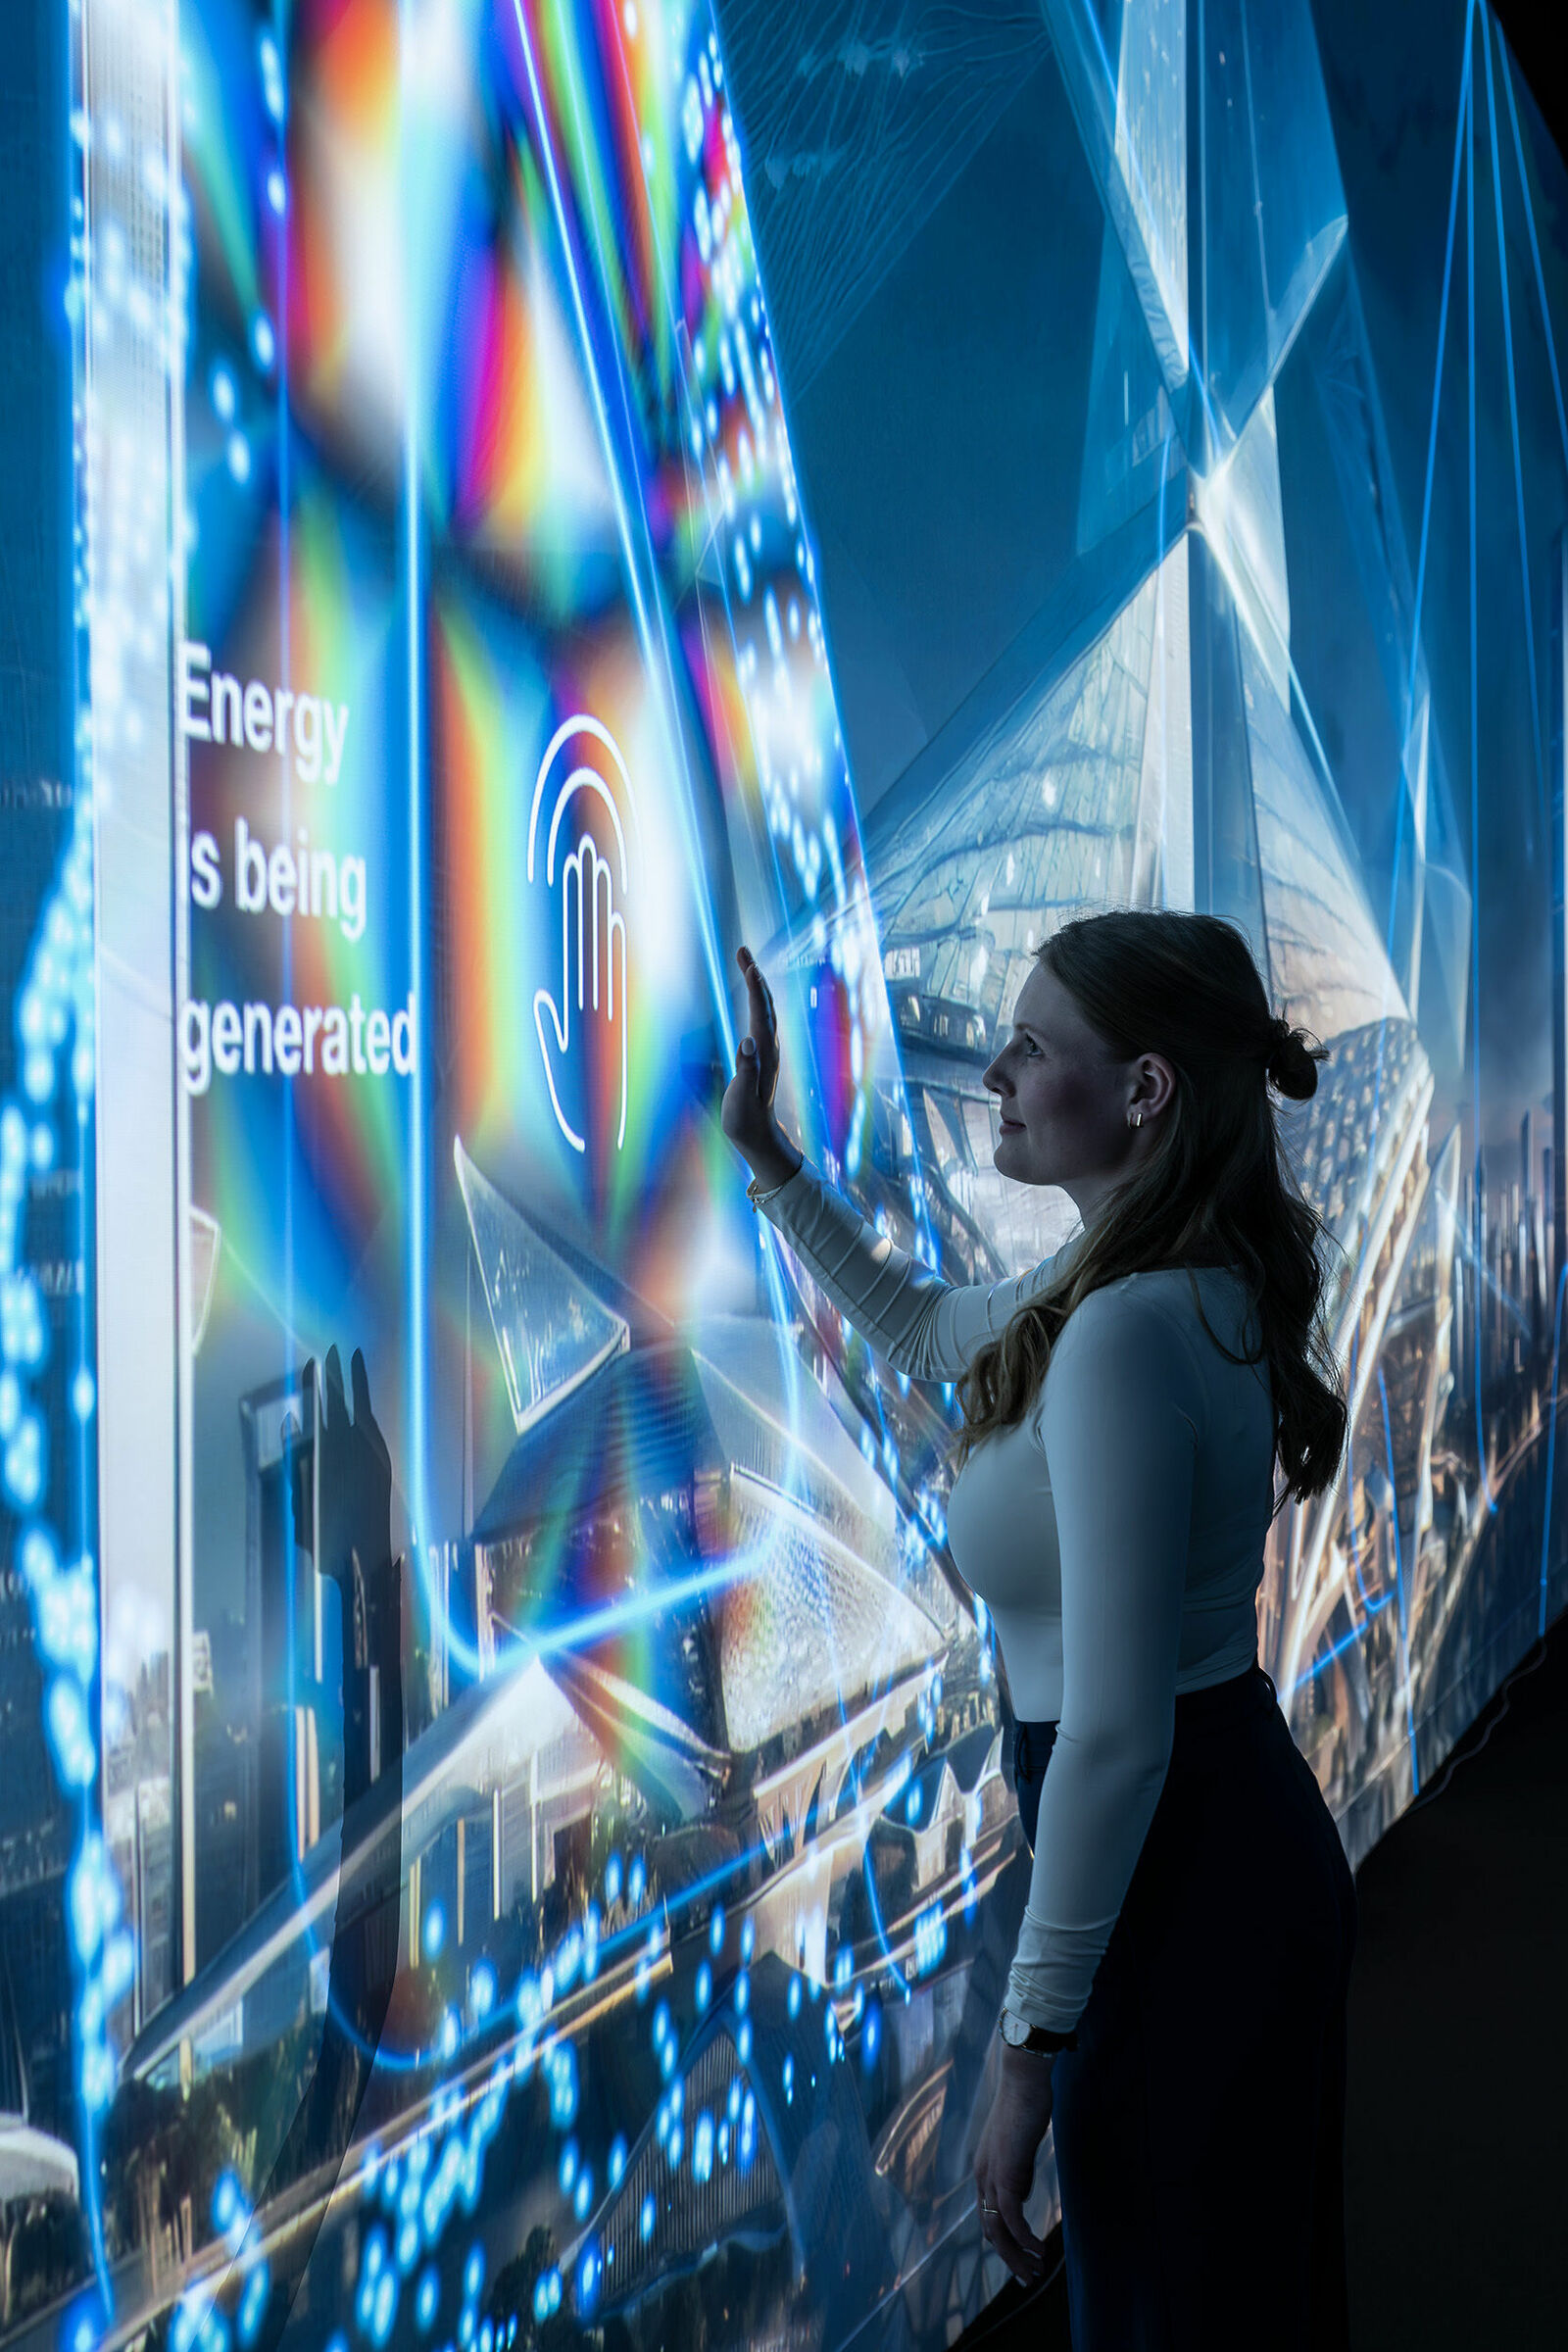 A person interacts with glowing displays featuring futuristic graphics about energy generation.